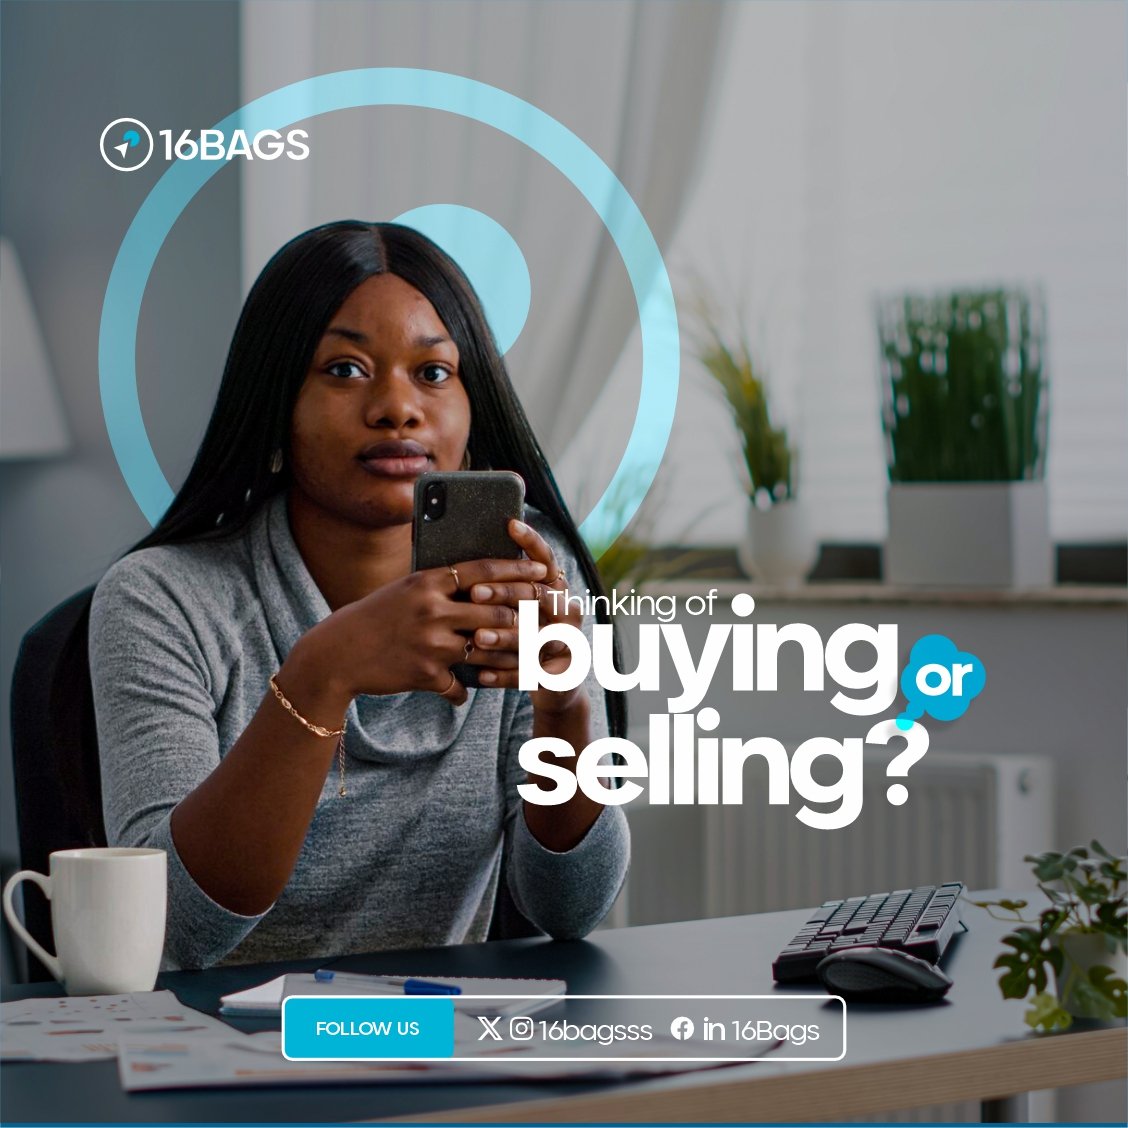 Thinking of buying or selling?

16Bags is your trusted marketplace to either buy or sell a business. 

To get started, visit 16bags.com

#16bags #BuyABusiness #SellYourBusiness